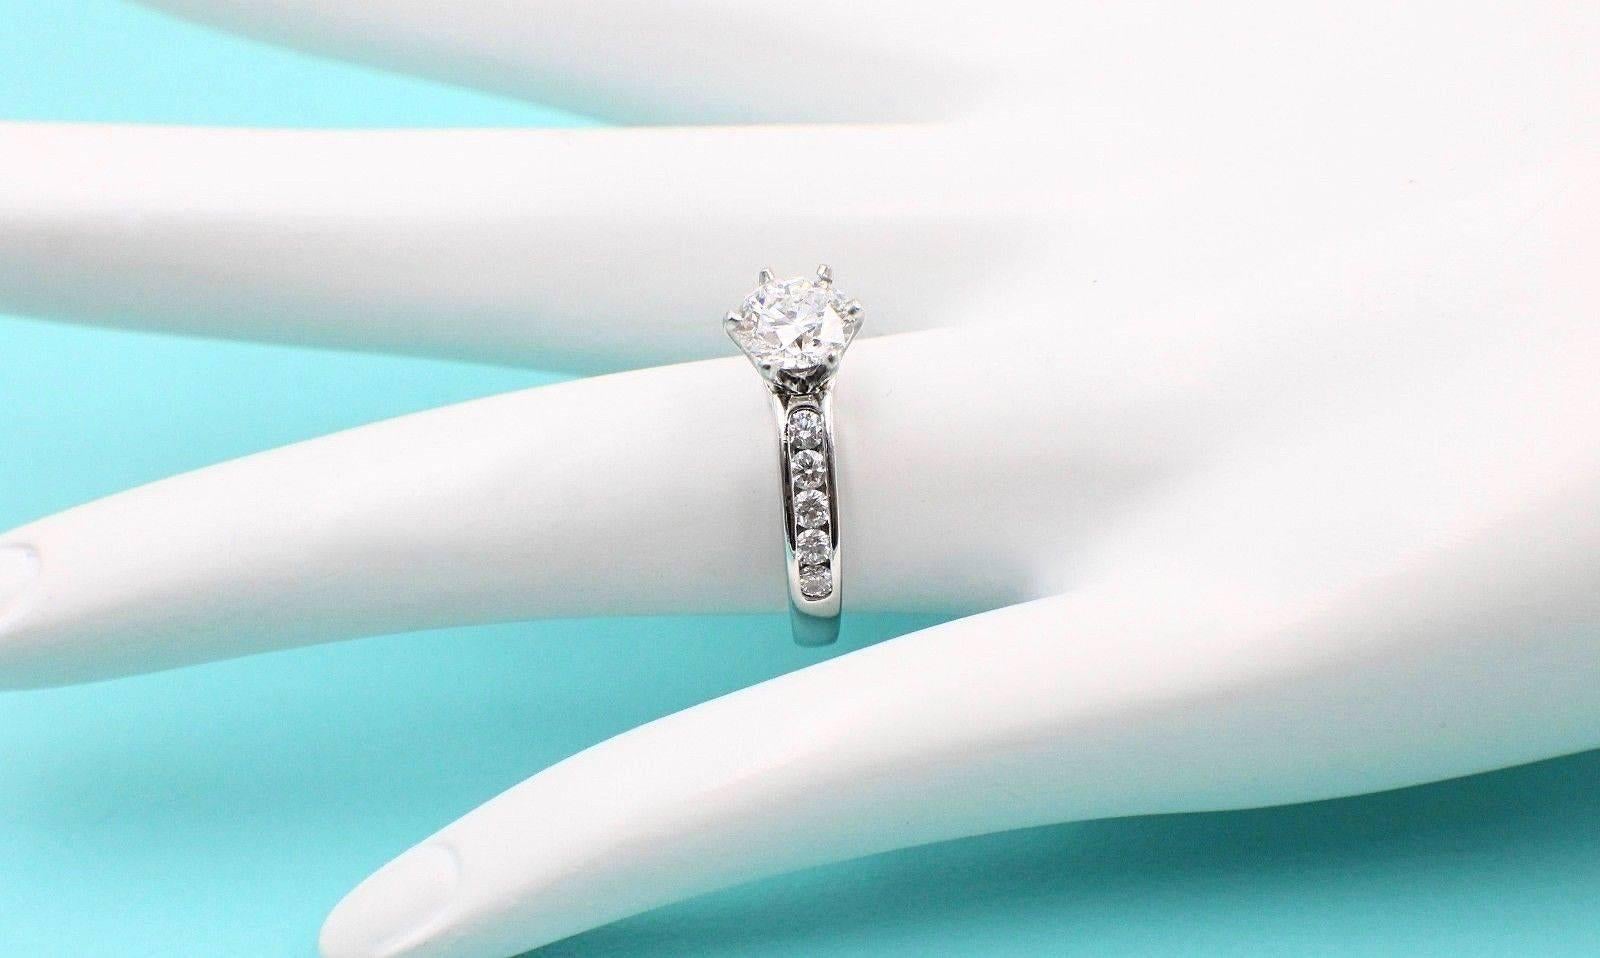 Tiffany & Co. Round Diamond Engagement Ring with Diamond Band 1.38 Carat F VVS2 In Excellent Condition For Sale In San Diego, CA